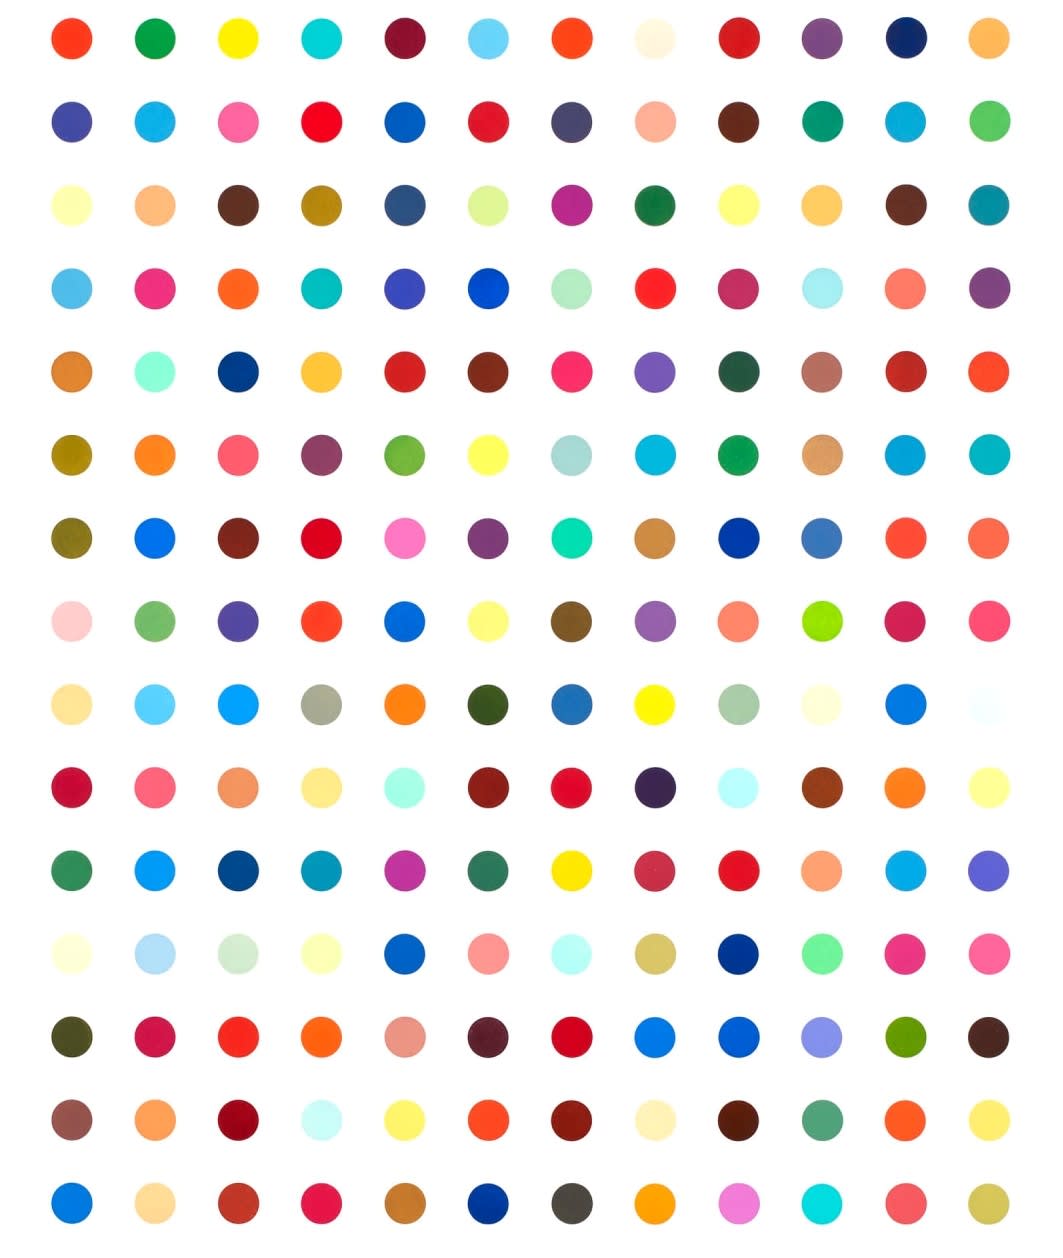 10 Things You Didn't Know About Damien Hirst